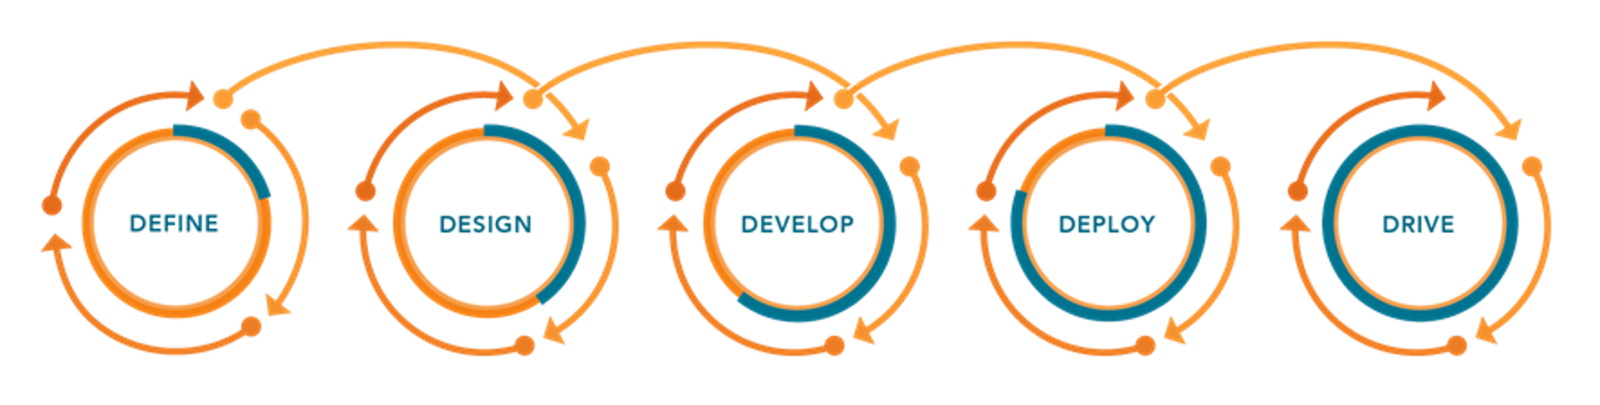 Our implementation methodology shown as 5 circles cycling forward with momentum moving you through each; define, design, develop, deploy, and drive. 